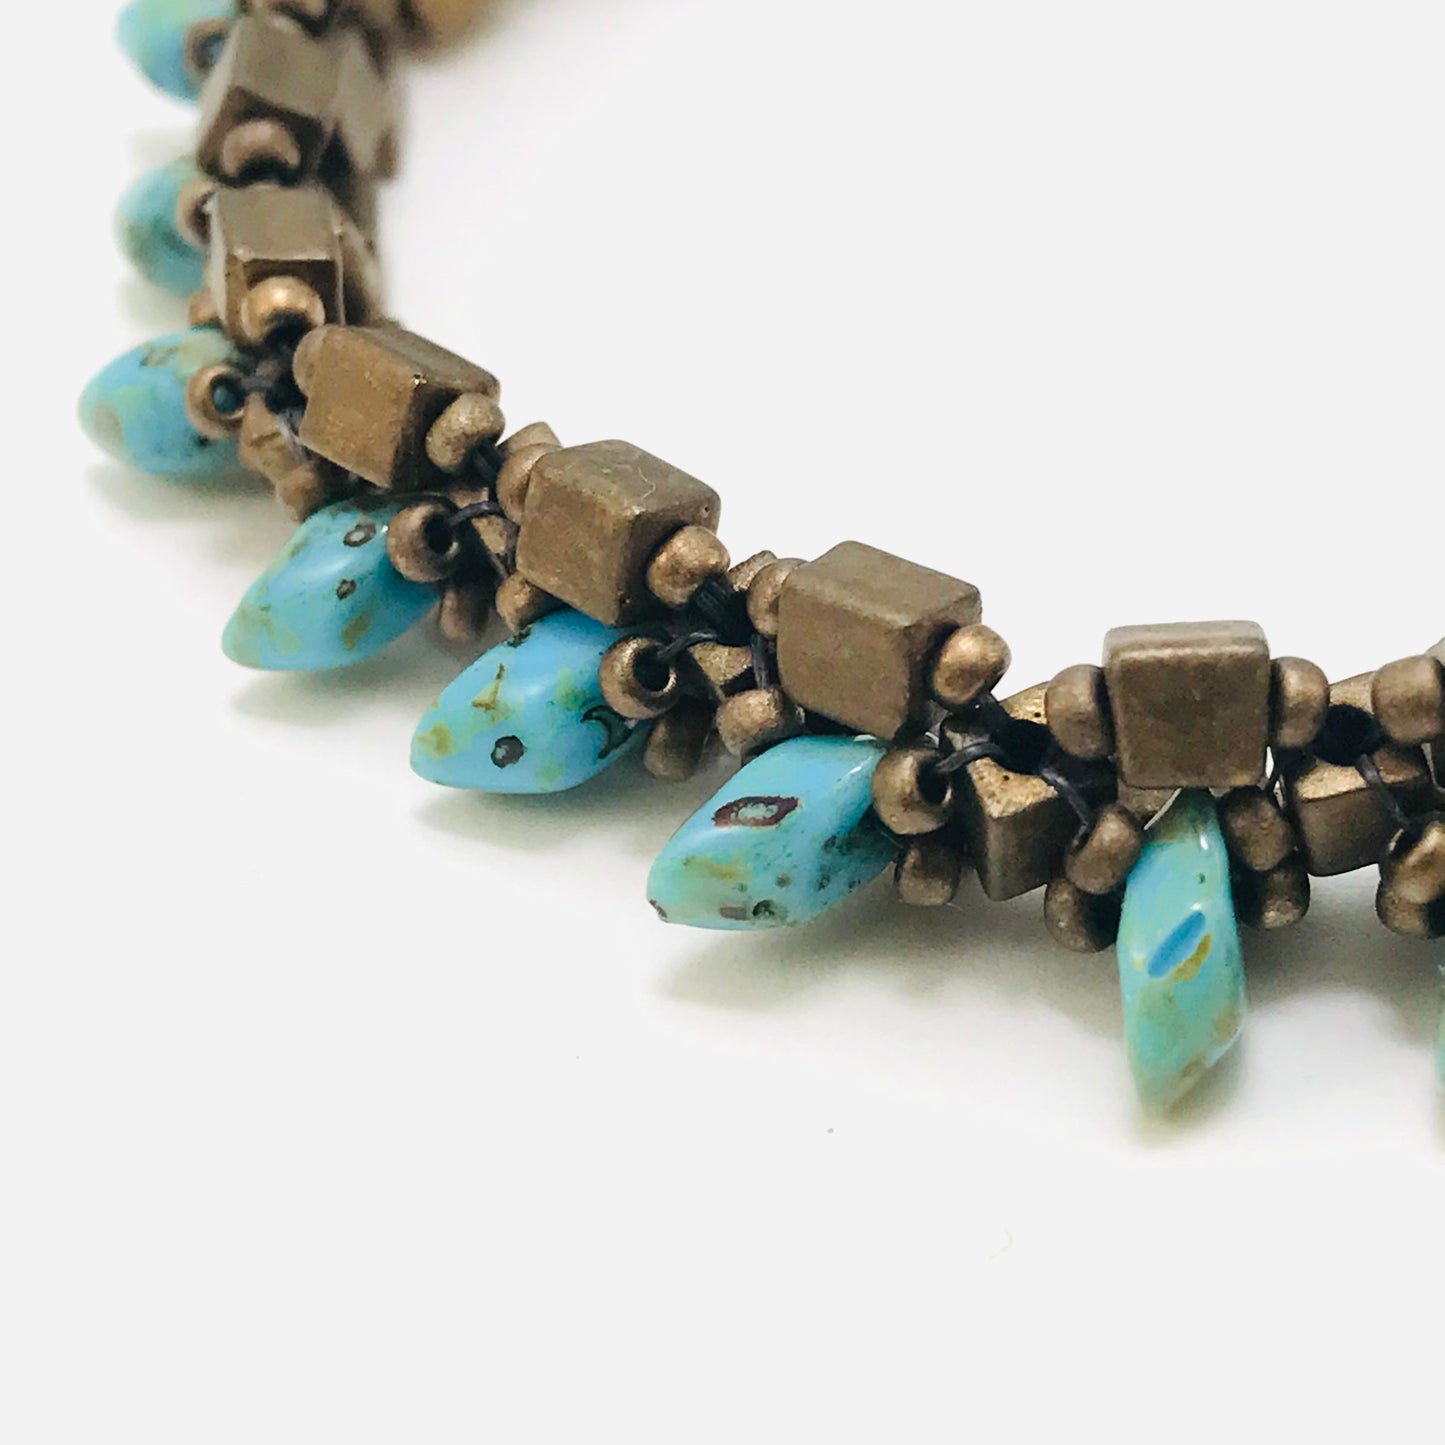 Matte Brass and Turquoise Spiky Bracelet